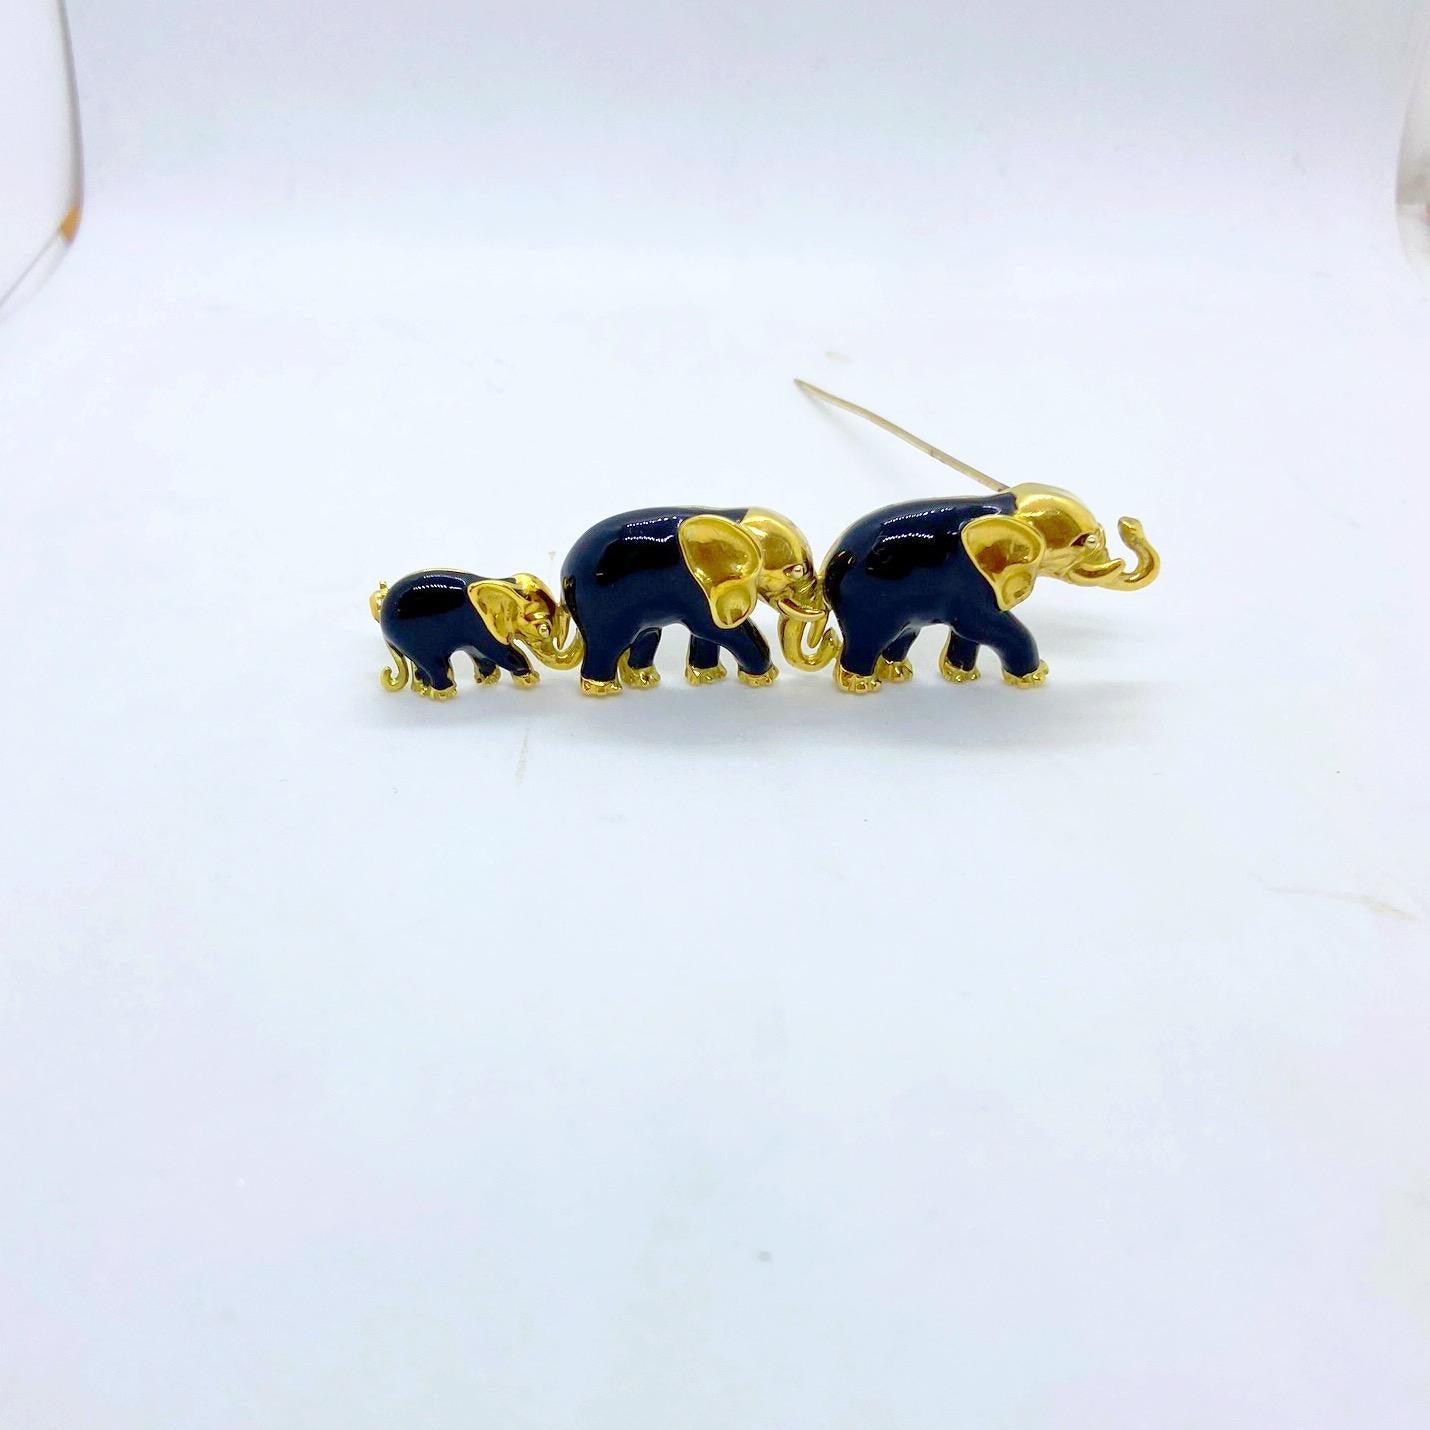 1This beautiful 18 karat yellow gold elephant brooch designed by Coin Roberto Italy. This brooch is composed  of a family of 3 elephants ,each with black enamel. The elephants have their tusks up for good luck!
the brooch measures 3